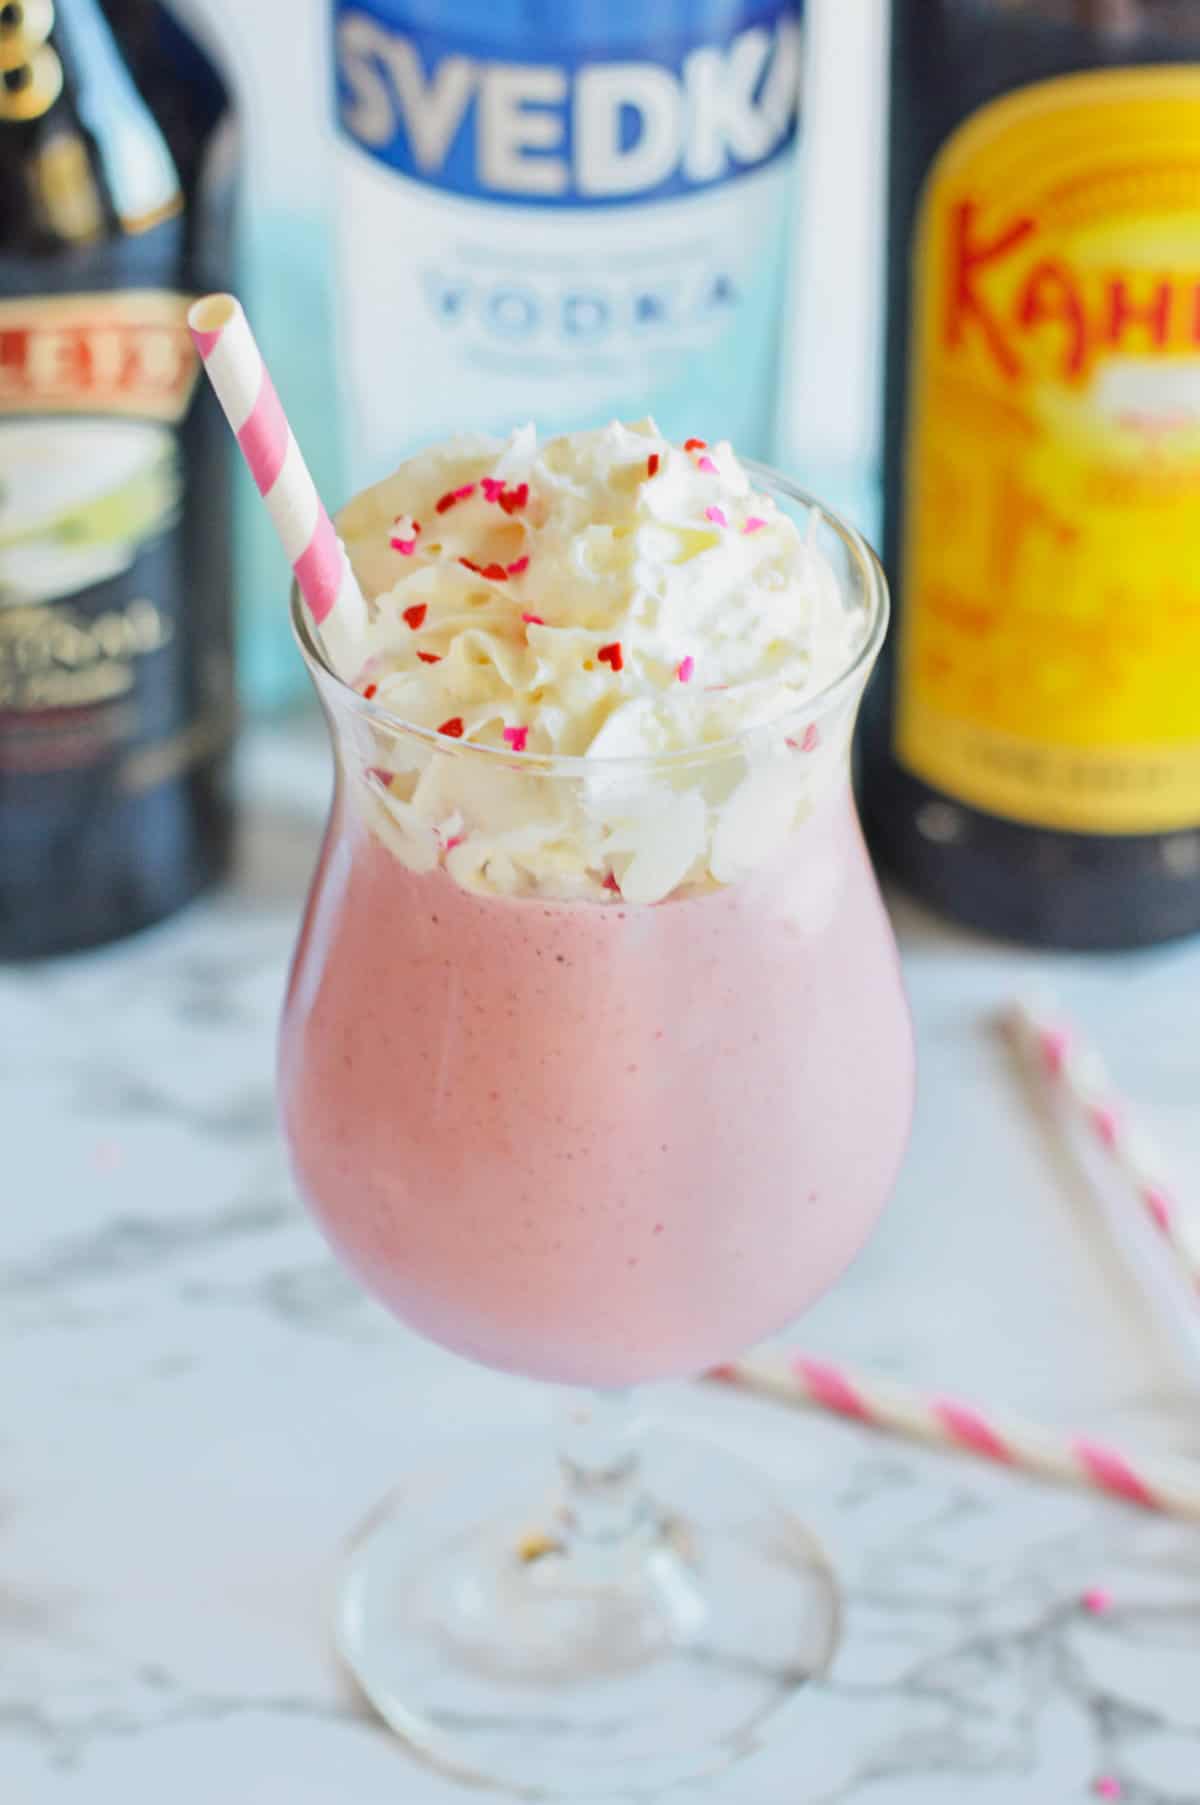 Pink strawberry mudslide in a glass with Kahula, vodka, and Baileys bottles behind it.